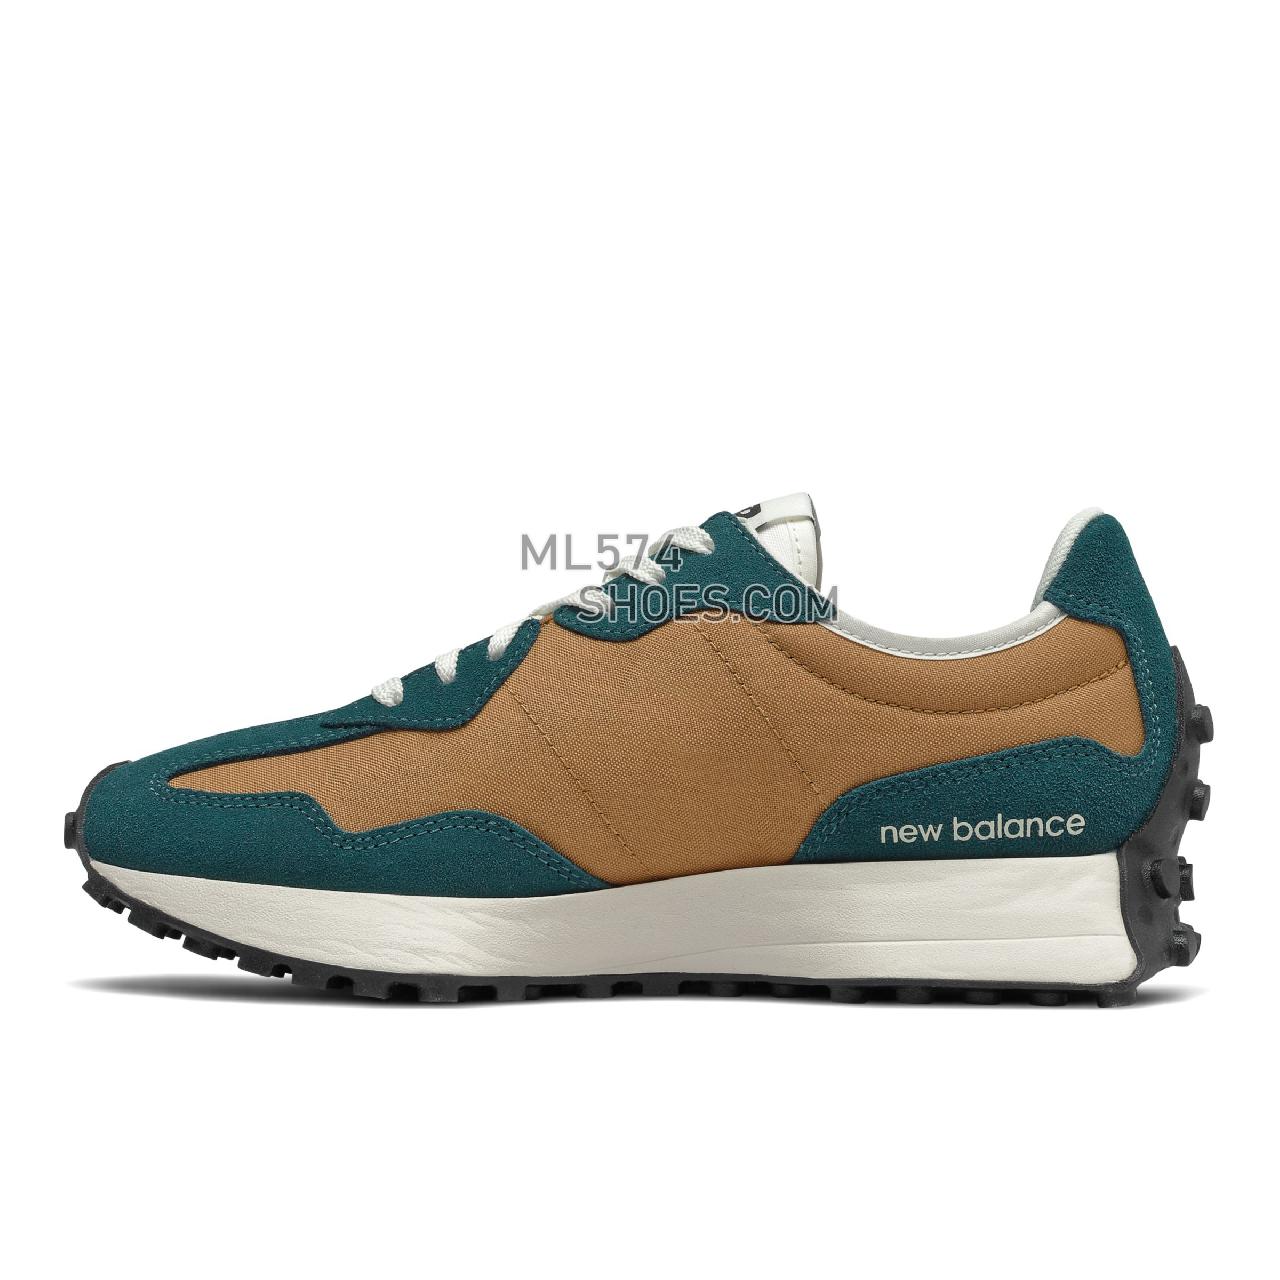 New Balance 327 - Women's Sport Style Sneakers - Mountain Teal with Workwear - WS327WN1